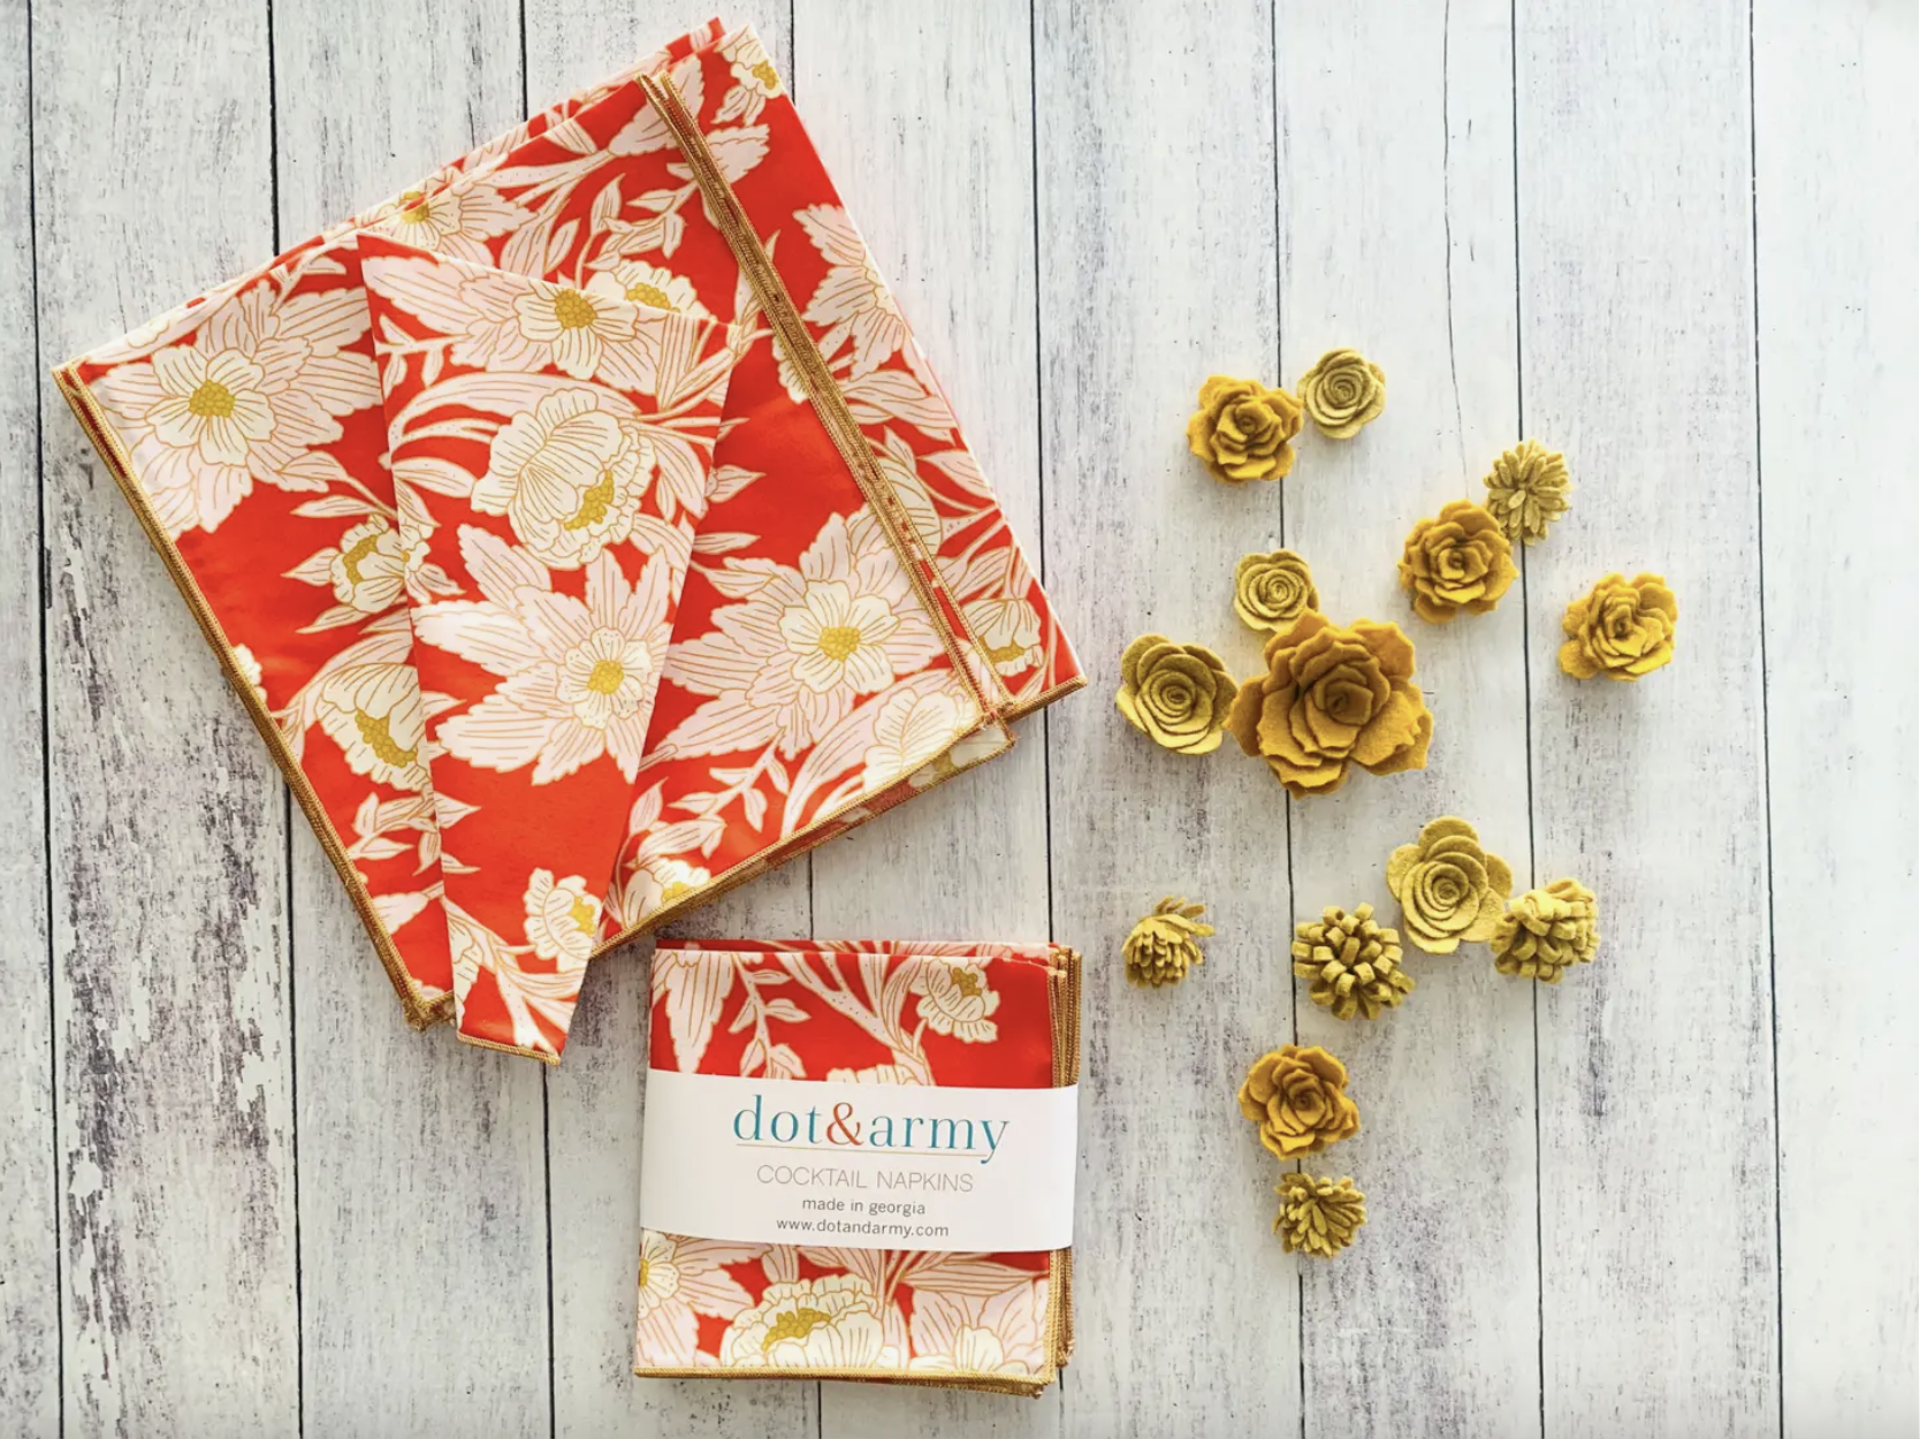 Sunset Floral Cloth Napkin, set of 4 by Dot and Army